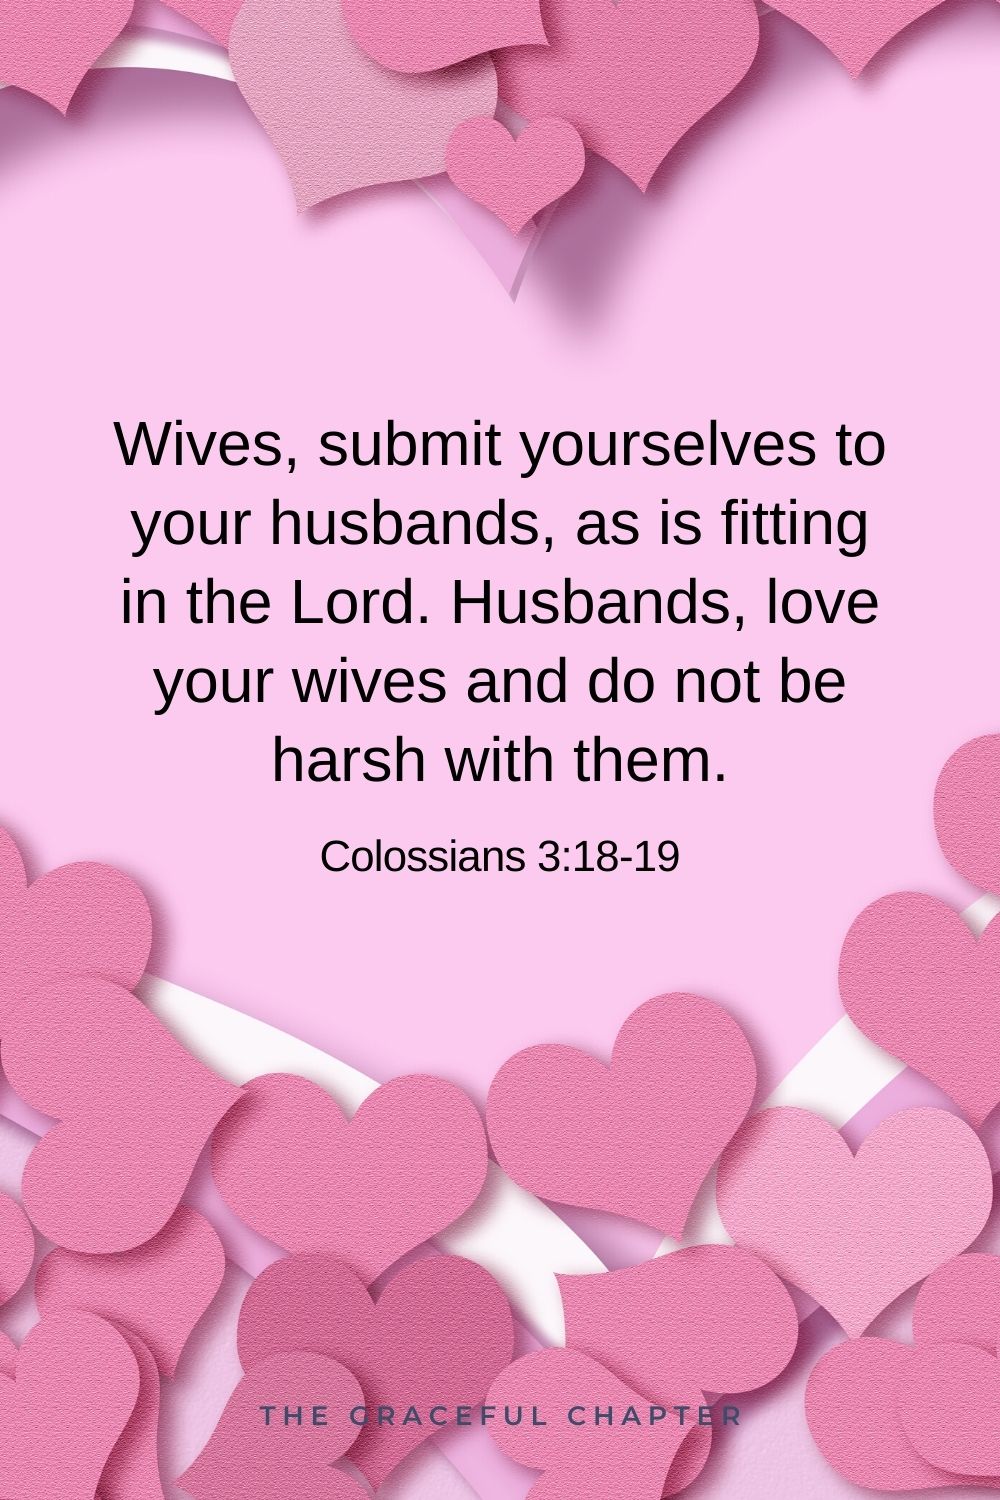 Wives, submit yourselves to your husbands, as is fitting in the Lord. Husbands, love your wives and do not be harsh with them. Colossians 3:18-19